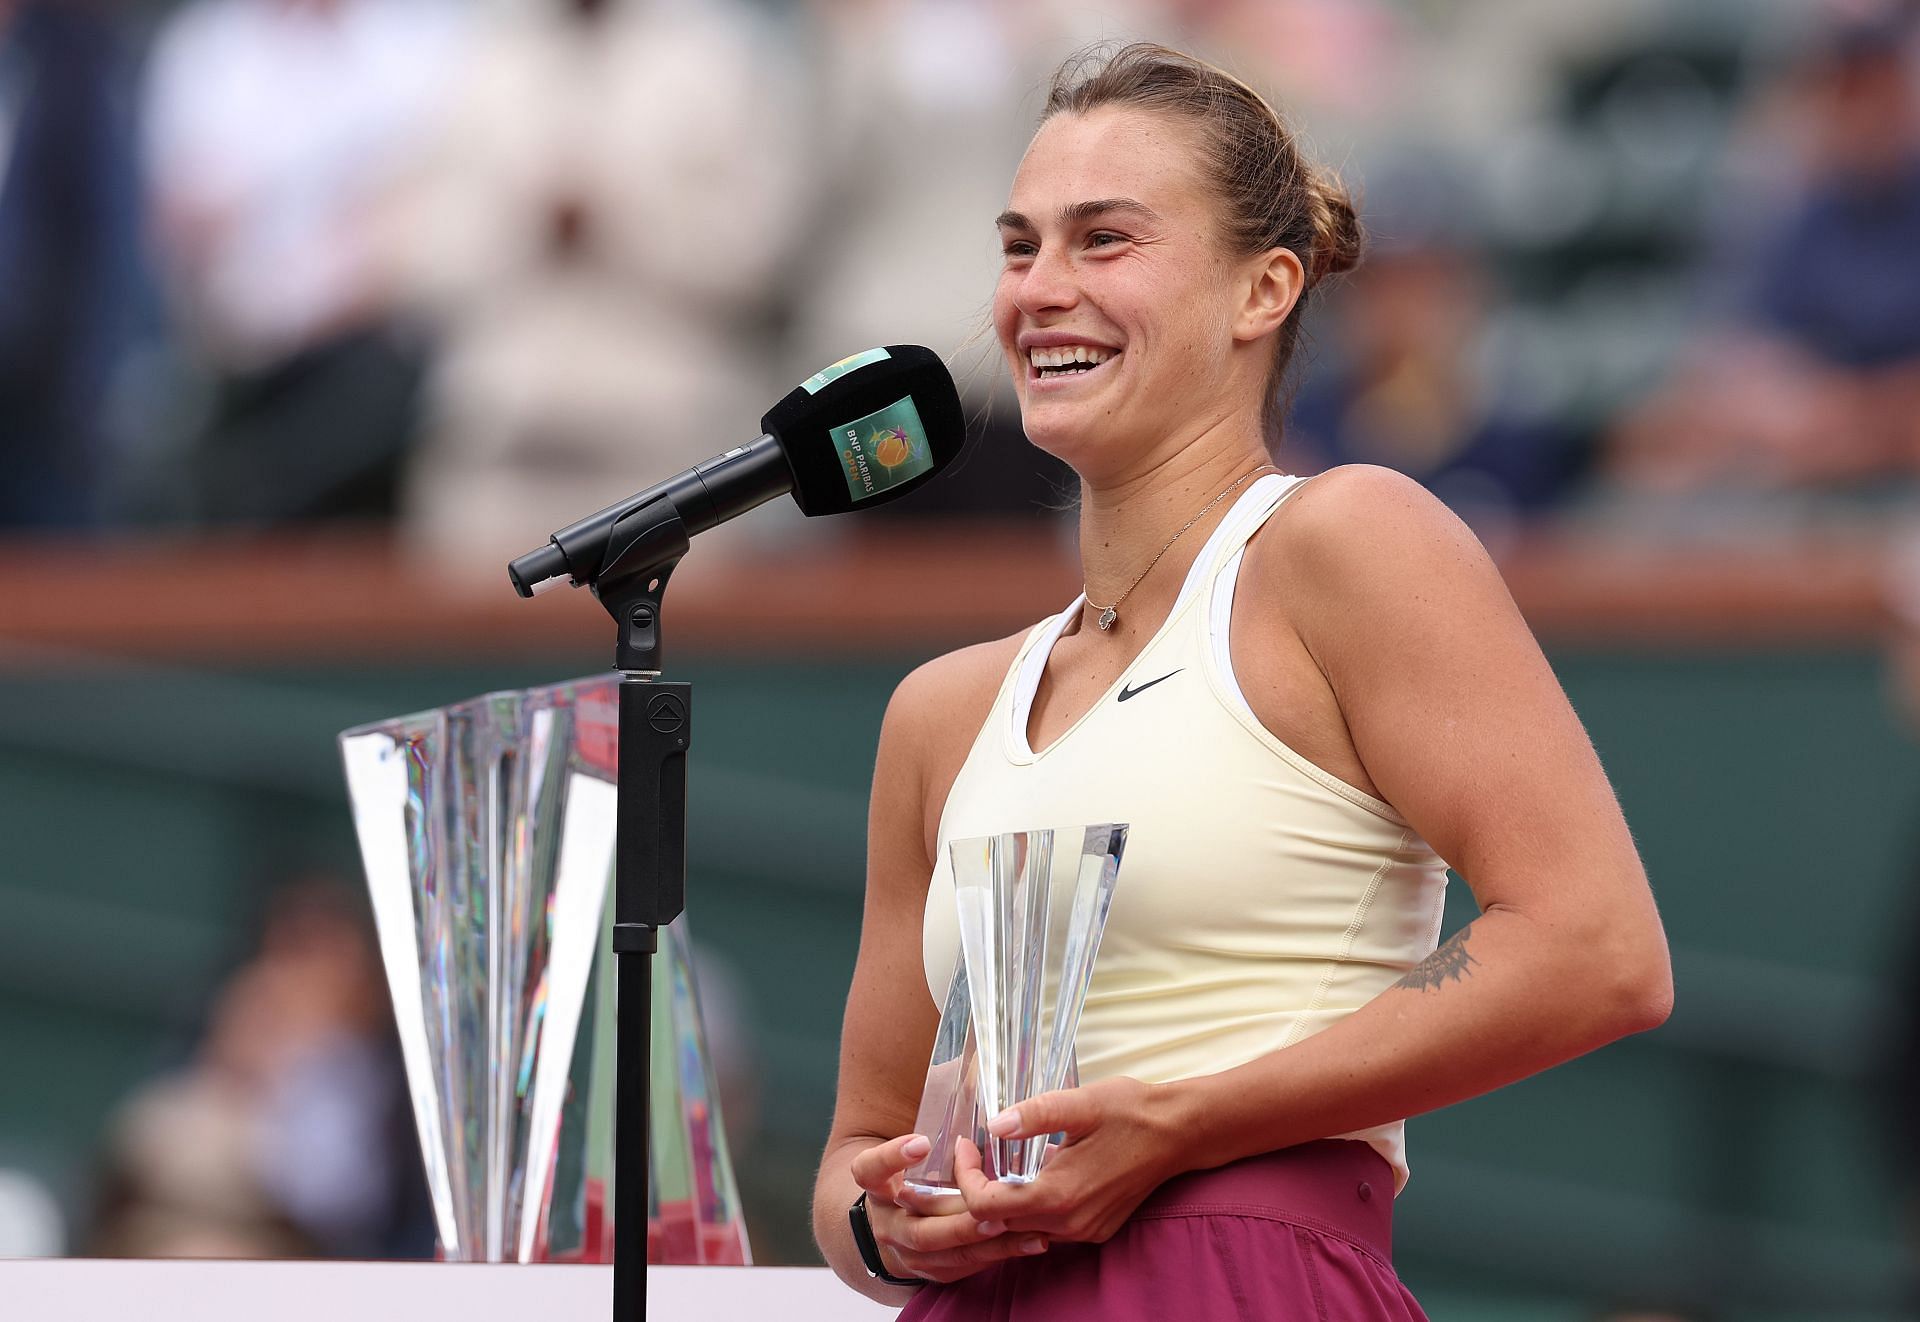 Aryna Sabalenka will be among the favorites to win the Miami Open